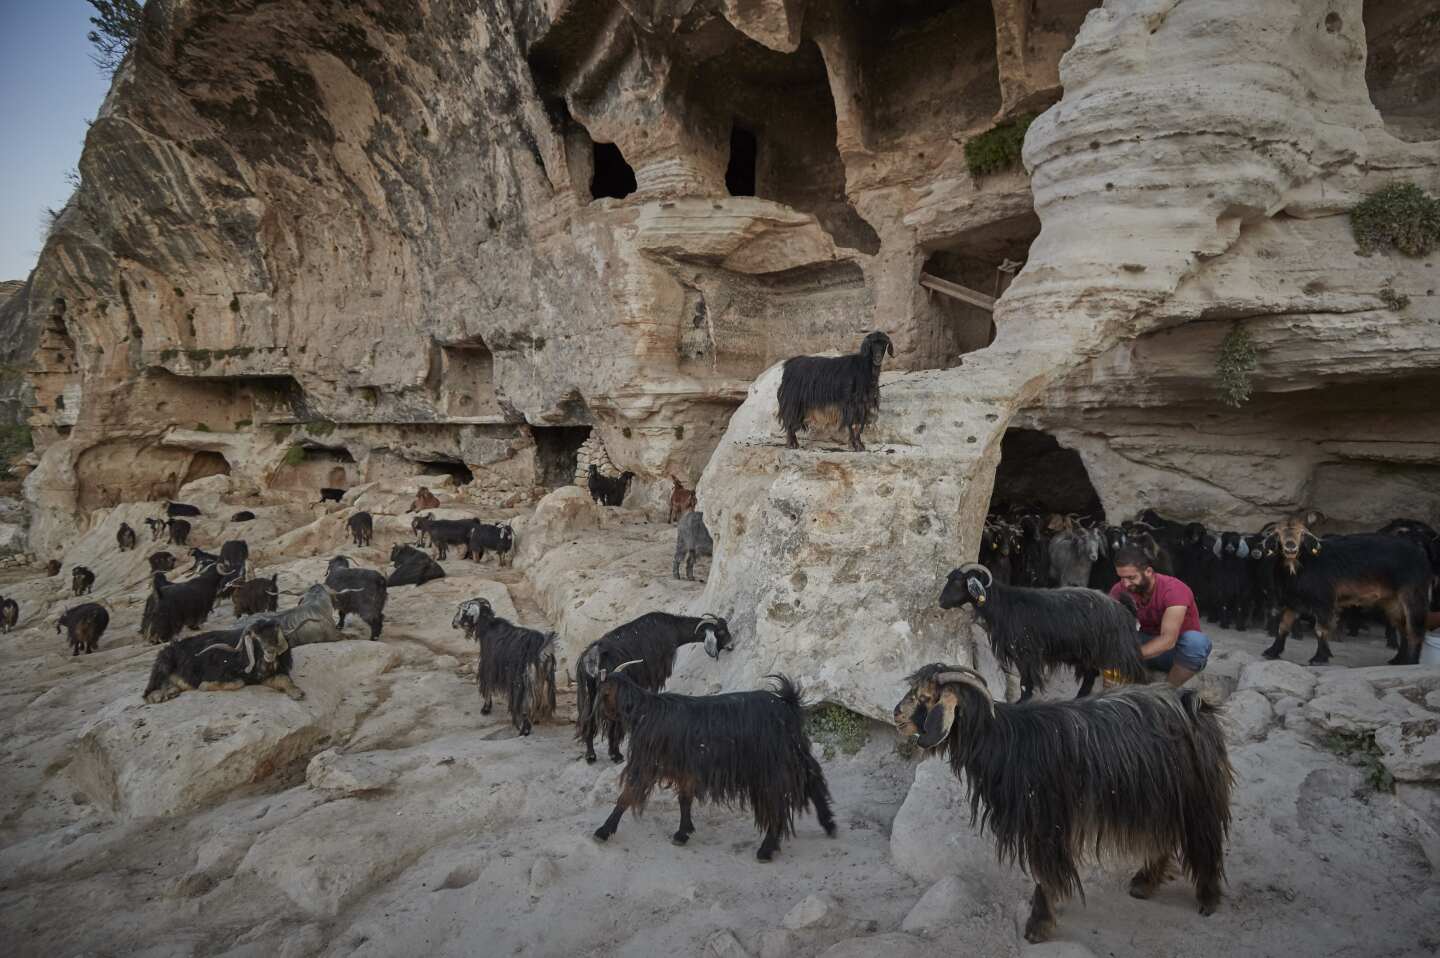 HASANKEYF, TURKEY - SEPTEMBER 23: Shepard Eyüp Agalday (27) milks his goats by the caves that surround the ancient town of Hasankeyf, one of the oldest continuously inhabited settlements on earth, dating as far back as 12,000 years. Eyüp's family have been shepherds in the town for generations, with his father and grandfather before him walking the same paths. Today he and his brother Davut (32) have over 100 goats and will have to sell their herd when the waters come, they have no plan or idea what they are going to do. The Turkish Government have given residents until October 8th to evacuate the area before they permanently submerge the area for a controversial Ilisu dam project which will mean flooding 199 settlements in the area and displaying up to 80,000 people. Hundreds of still inhabited man made caves, churches, tombs and historical sites will be forever lost in the scheme. The ancient city has been part of many different cultures in its history, ancient Mesopotamia, Byzantium, and Arab and Ottoman empires with only an estimated 10% of the area having been explored by archaeologists. The Turkish government has built a new settlement for the 700 households 3km away but some will be left homeless with nowhere to go and many being forced to give up both their homes and their income from the land they own as they watch their homes slowly submerge when the government forcibly floods the city. Photo by Kiran Ridley